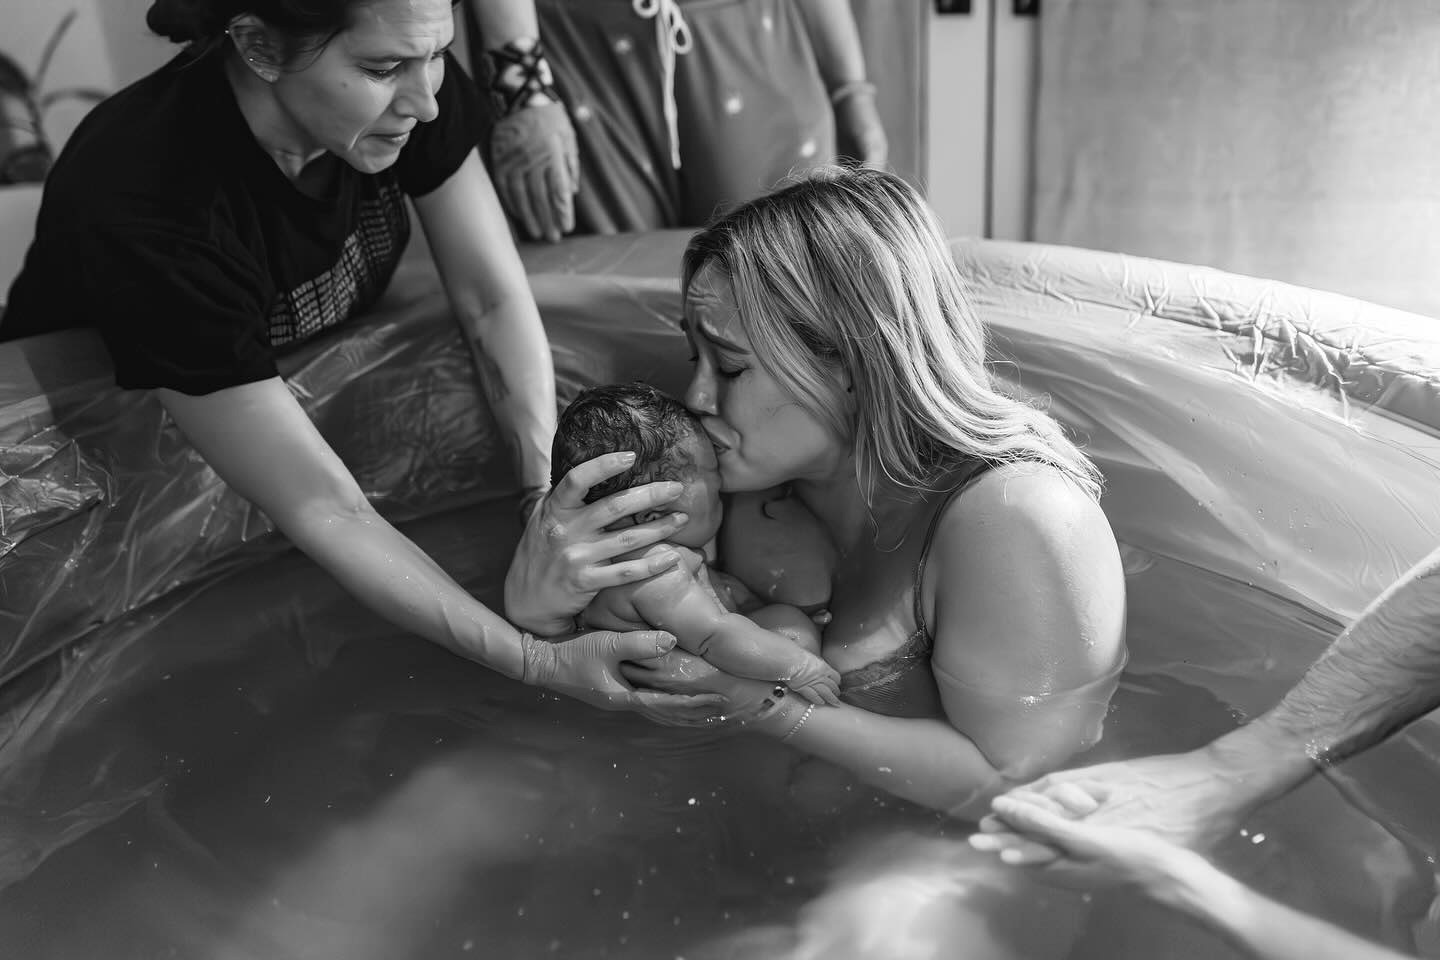 The Disney Channel alum was seen having an emotional at-home water birth to deliver her daughter